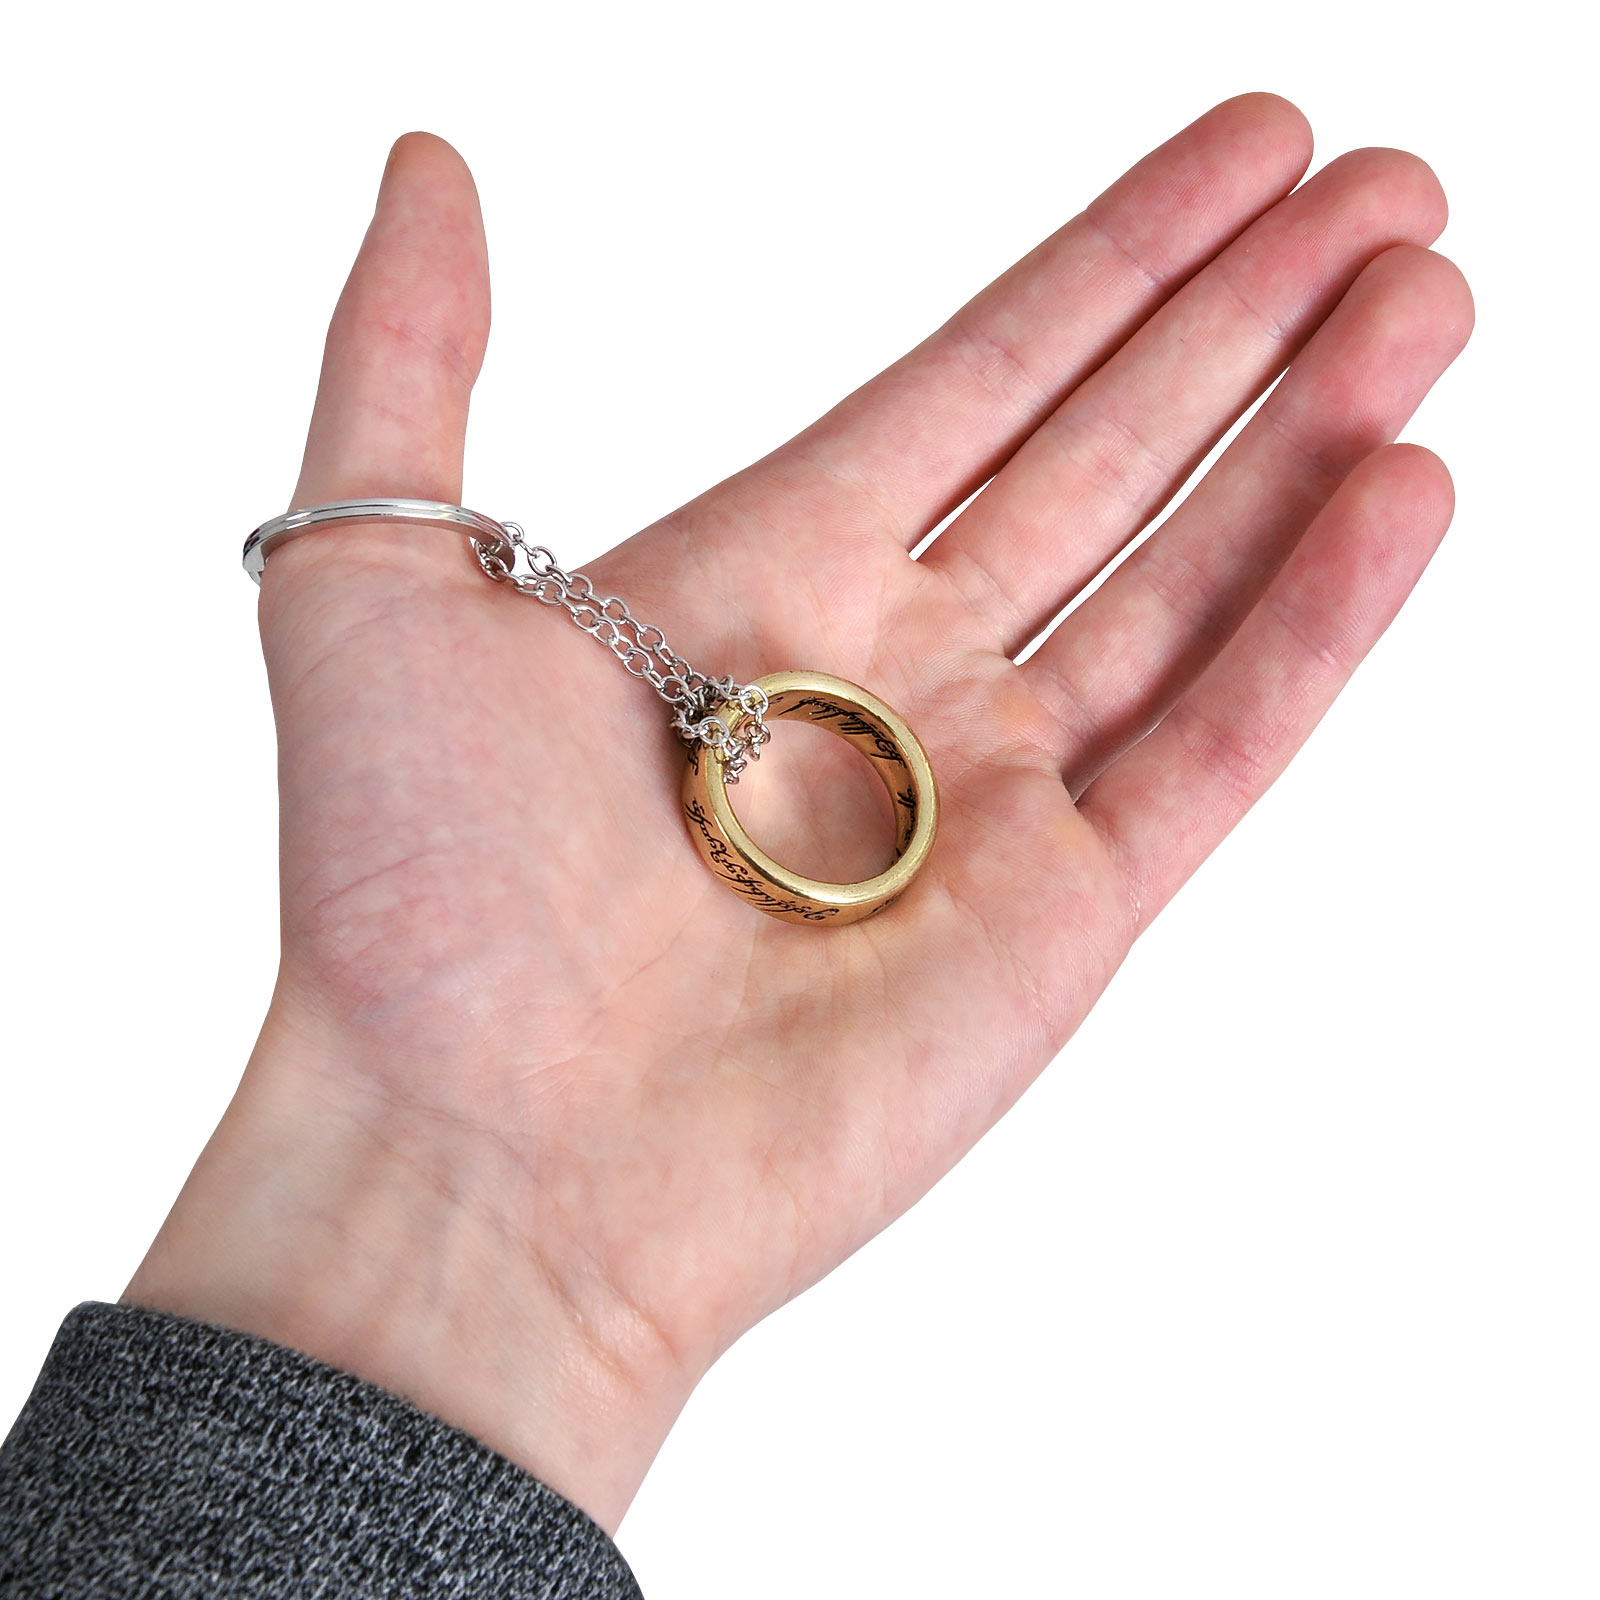 Lord of the Rings - The One Ring 3D Keychain